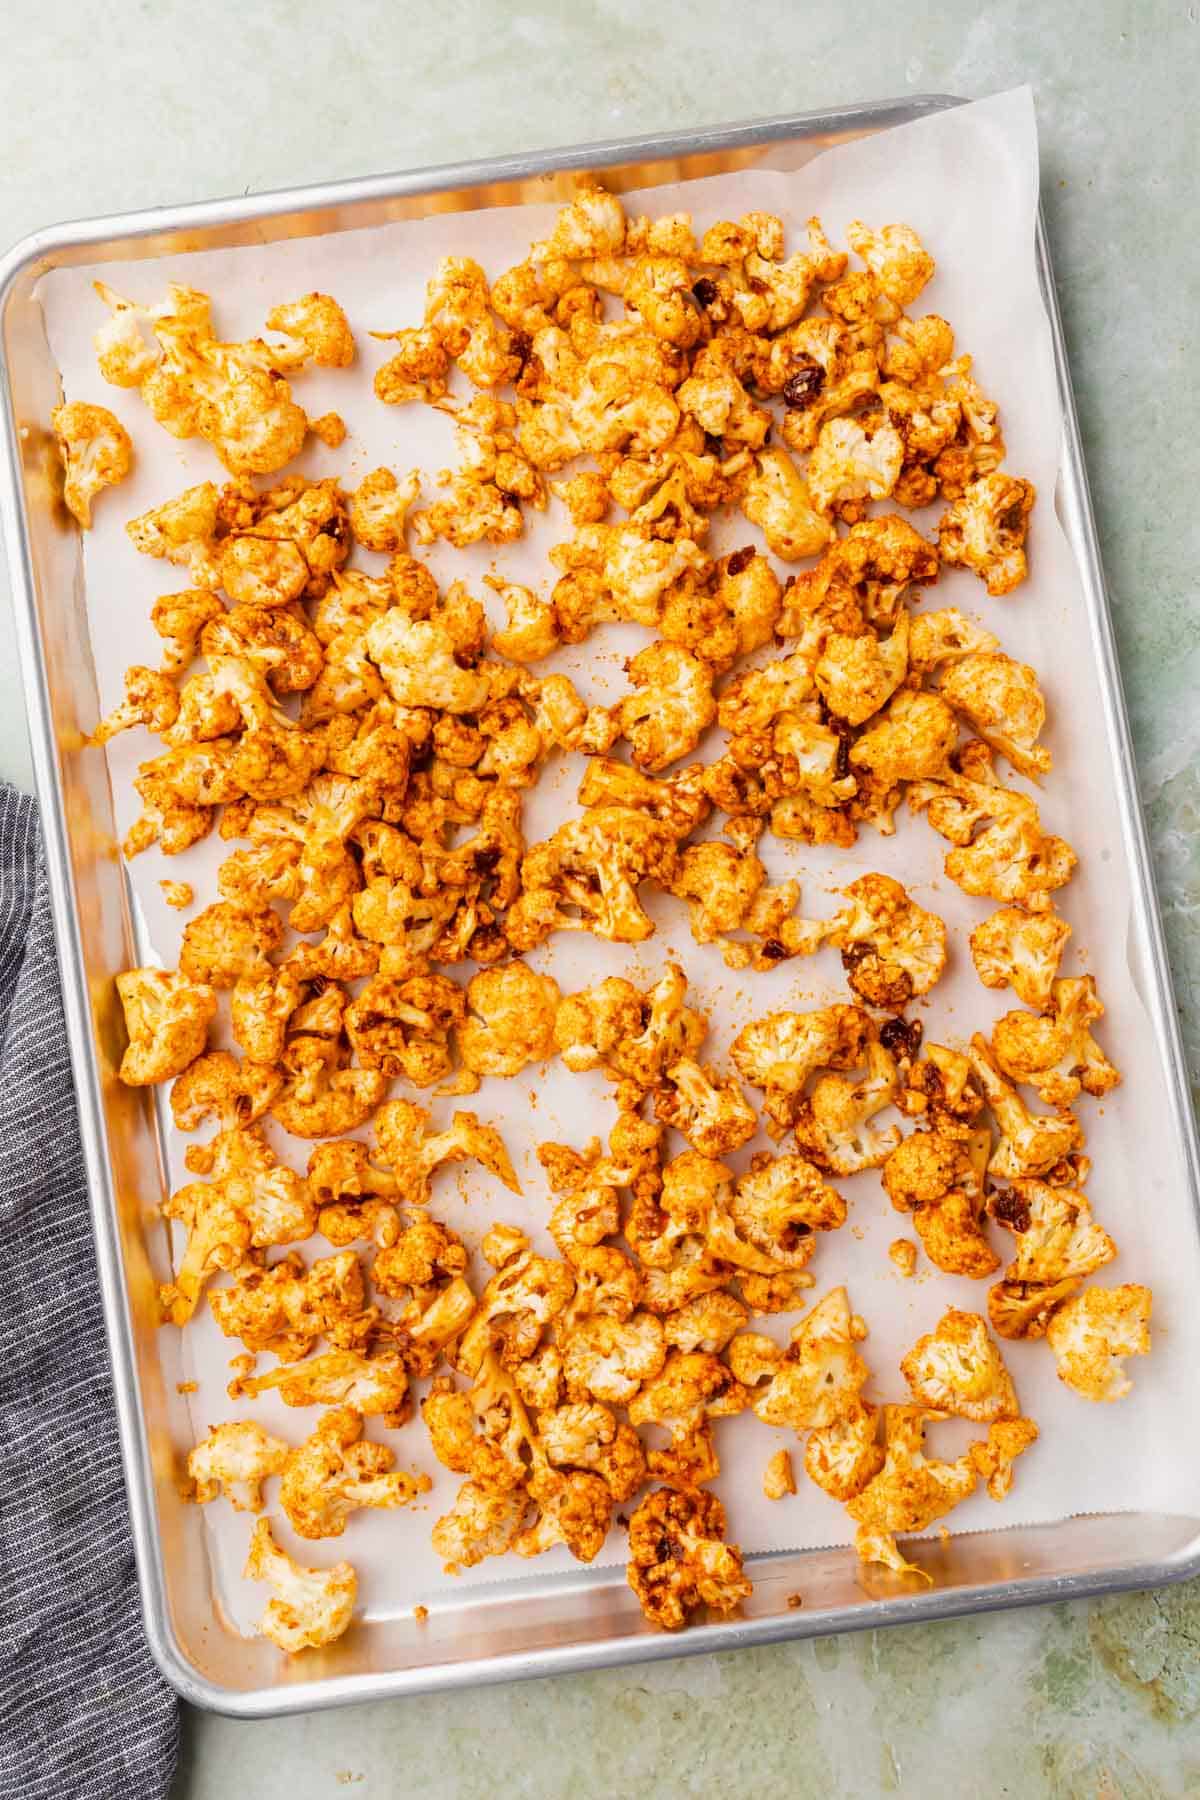 Cauliflower florets on a parchment lined baking sheet that have been tossed in a red sauce mixture before baking.